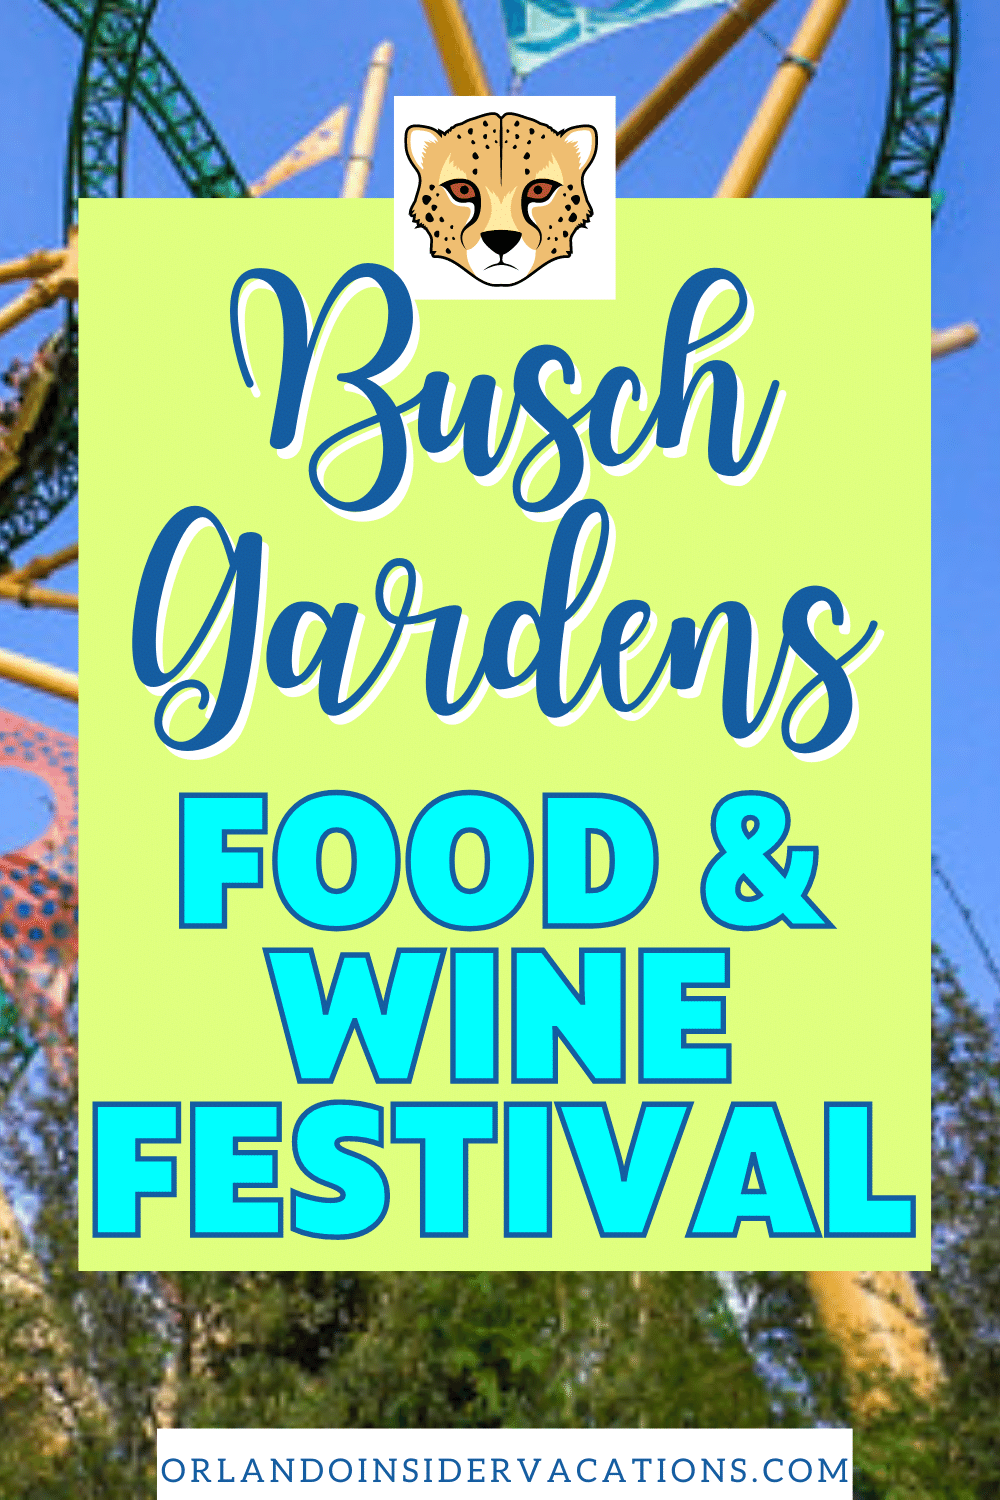 Busch Gardens Food and Wine Festival 2022 for Tasty Treats